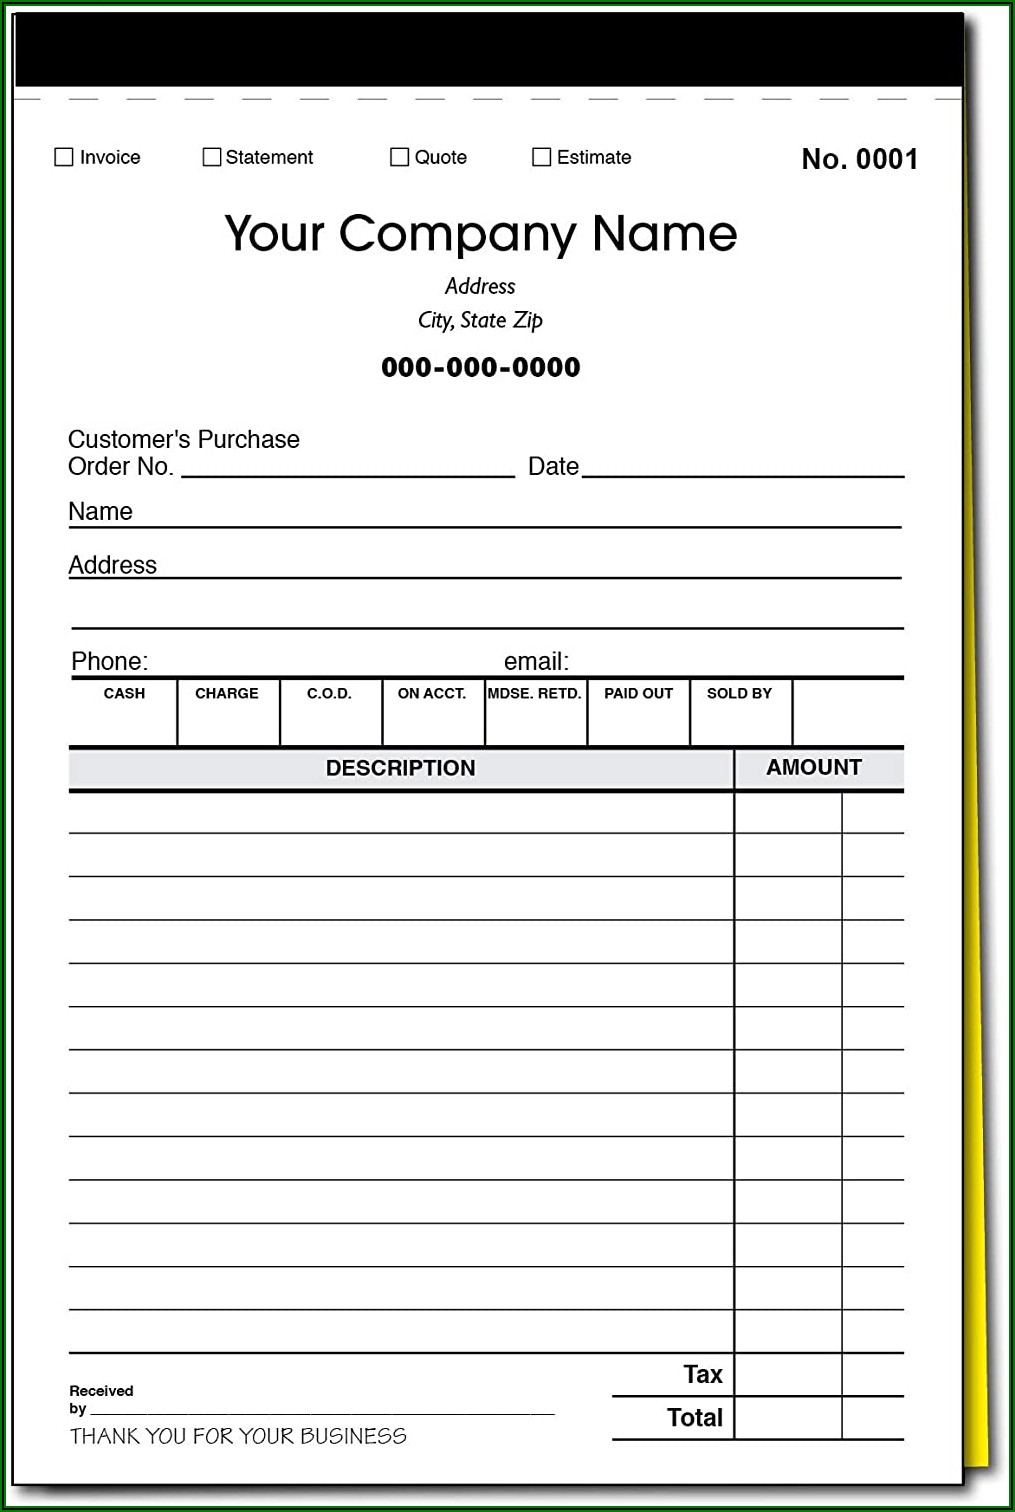 Personalized Carbonless Invoice Books